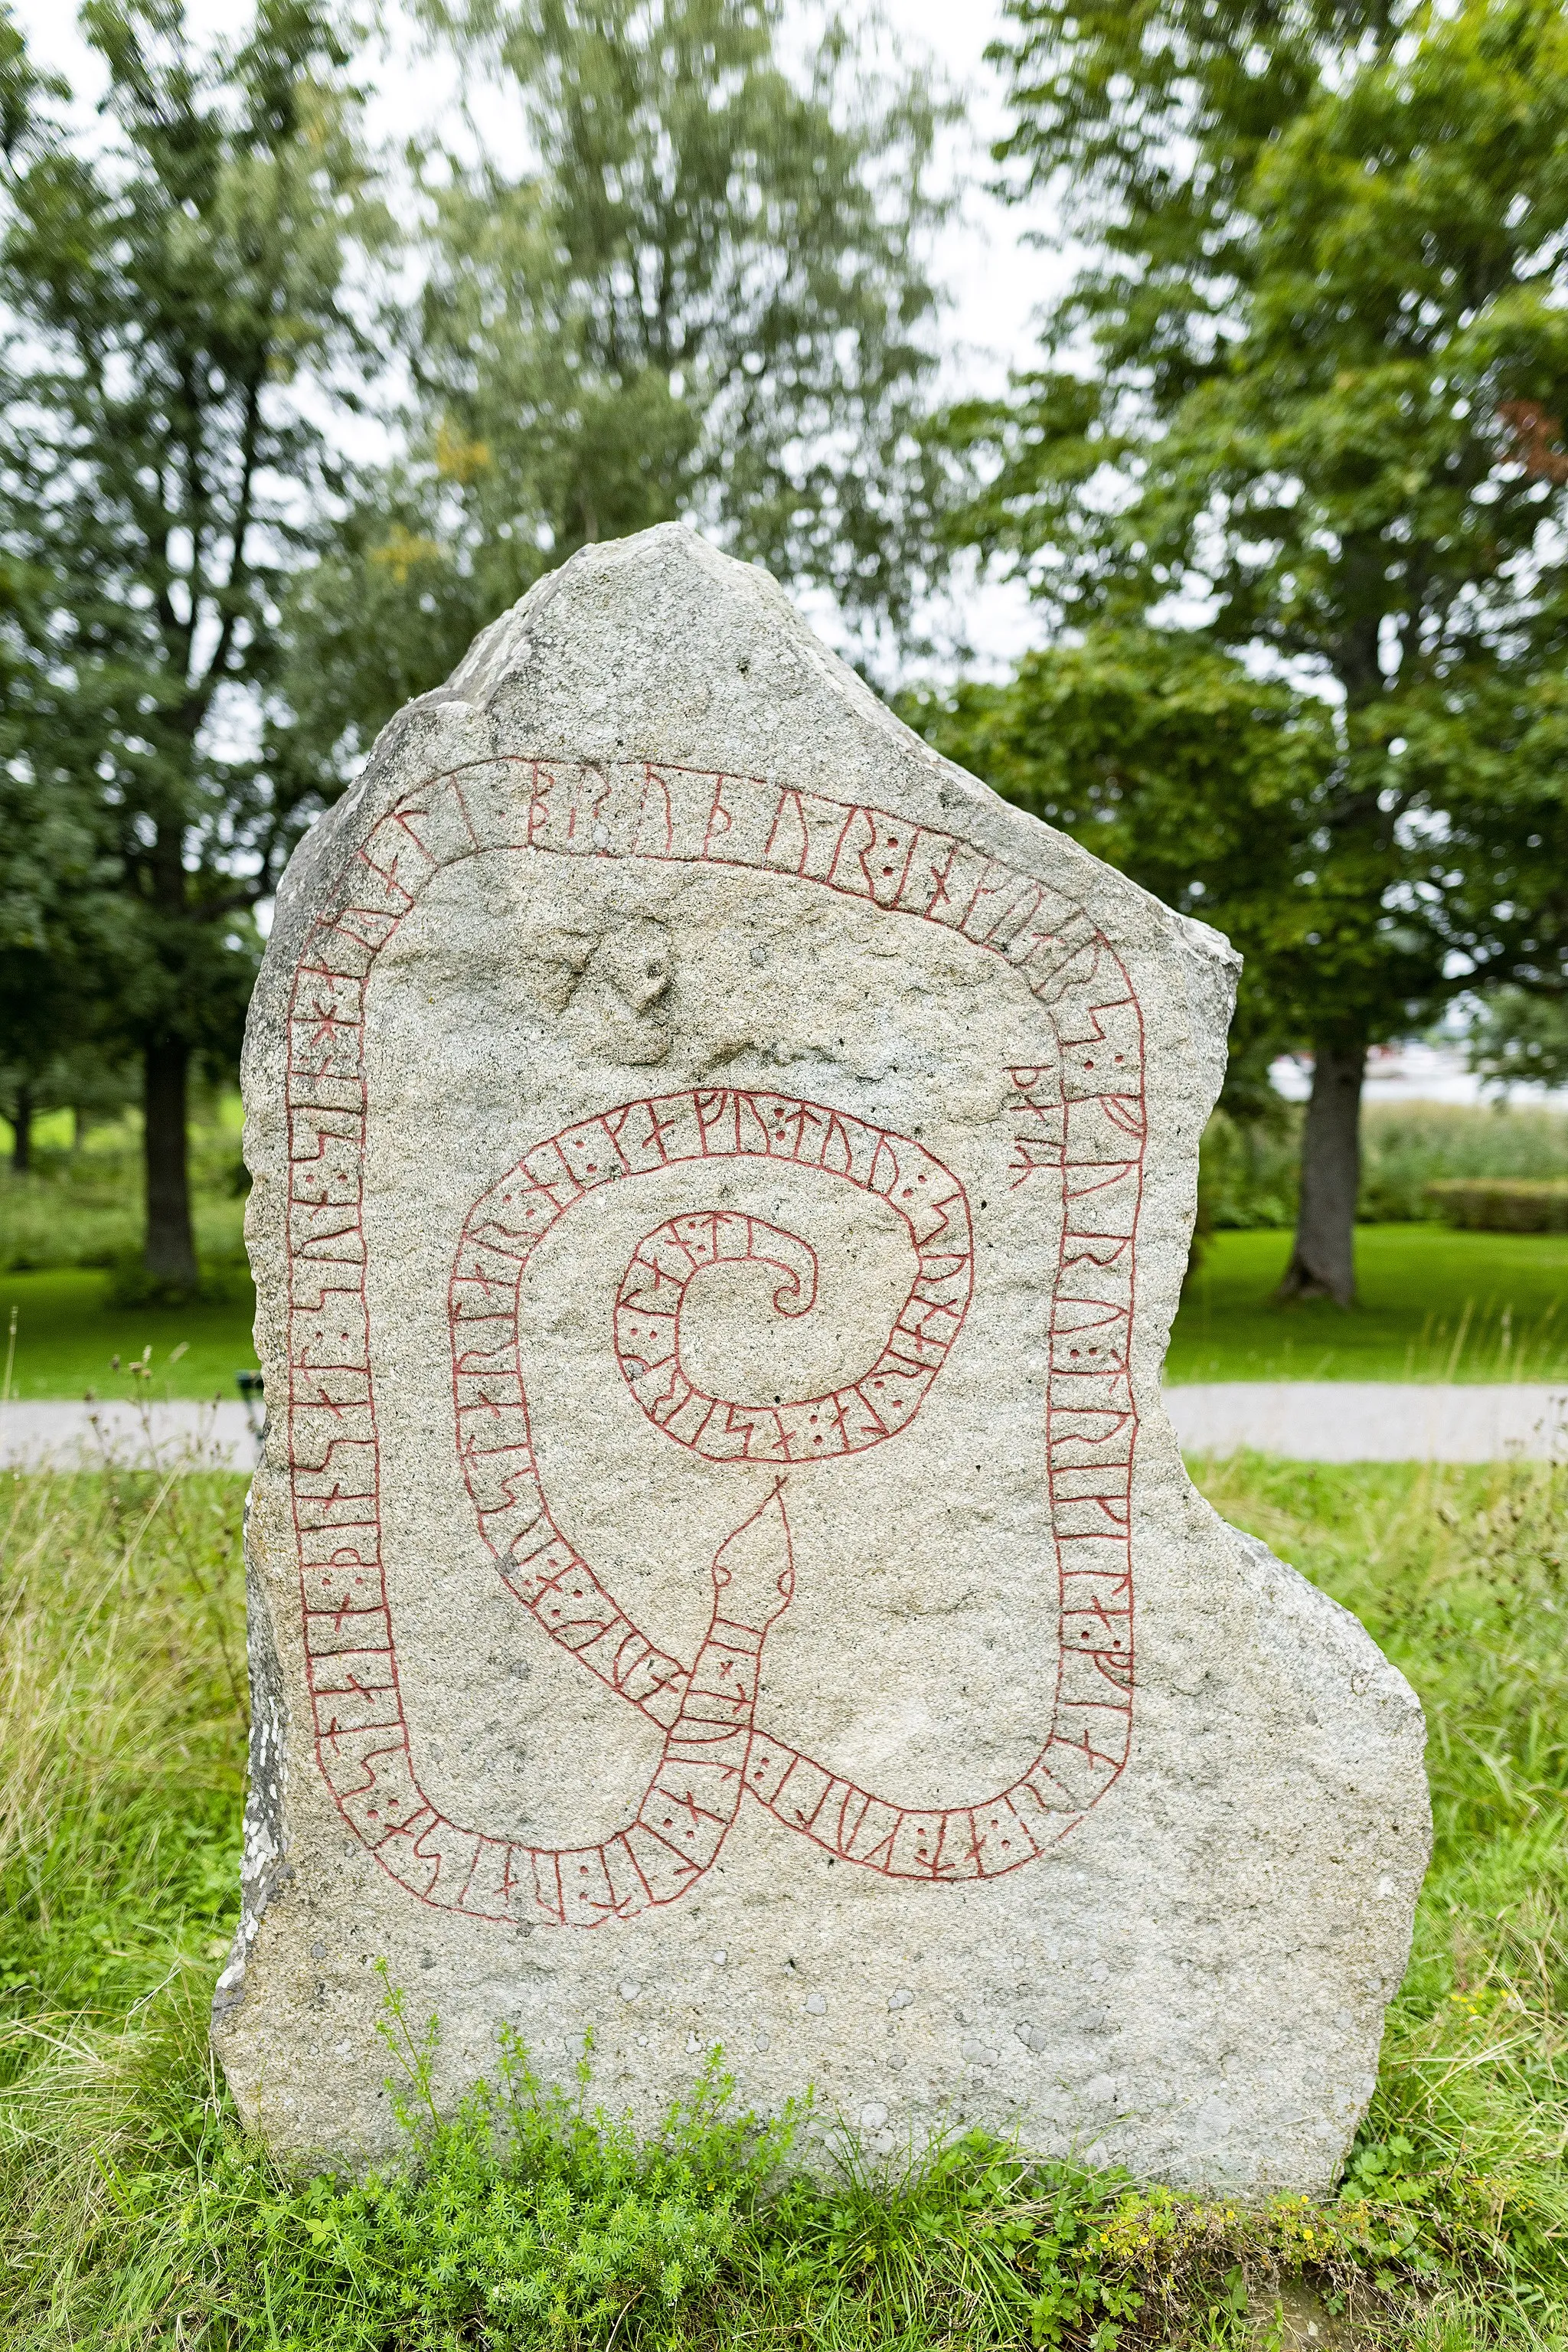 Photo showing: This is a picture of an archaeological site or a monument in Sweden, number c51d7a51-9583-40af-96f5-69ebe924f4b8 in the RAÄ Fornsök database.

It translates: "Tóla had this stone raised in memory of her son Haraldr, Ingvarr's brother. They travelled manfully far for gold, and in the east gave (food) to the eagle. (They) died in the south in Serkland."